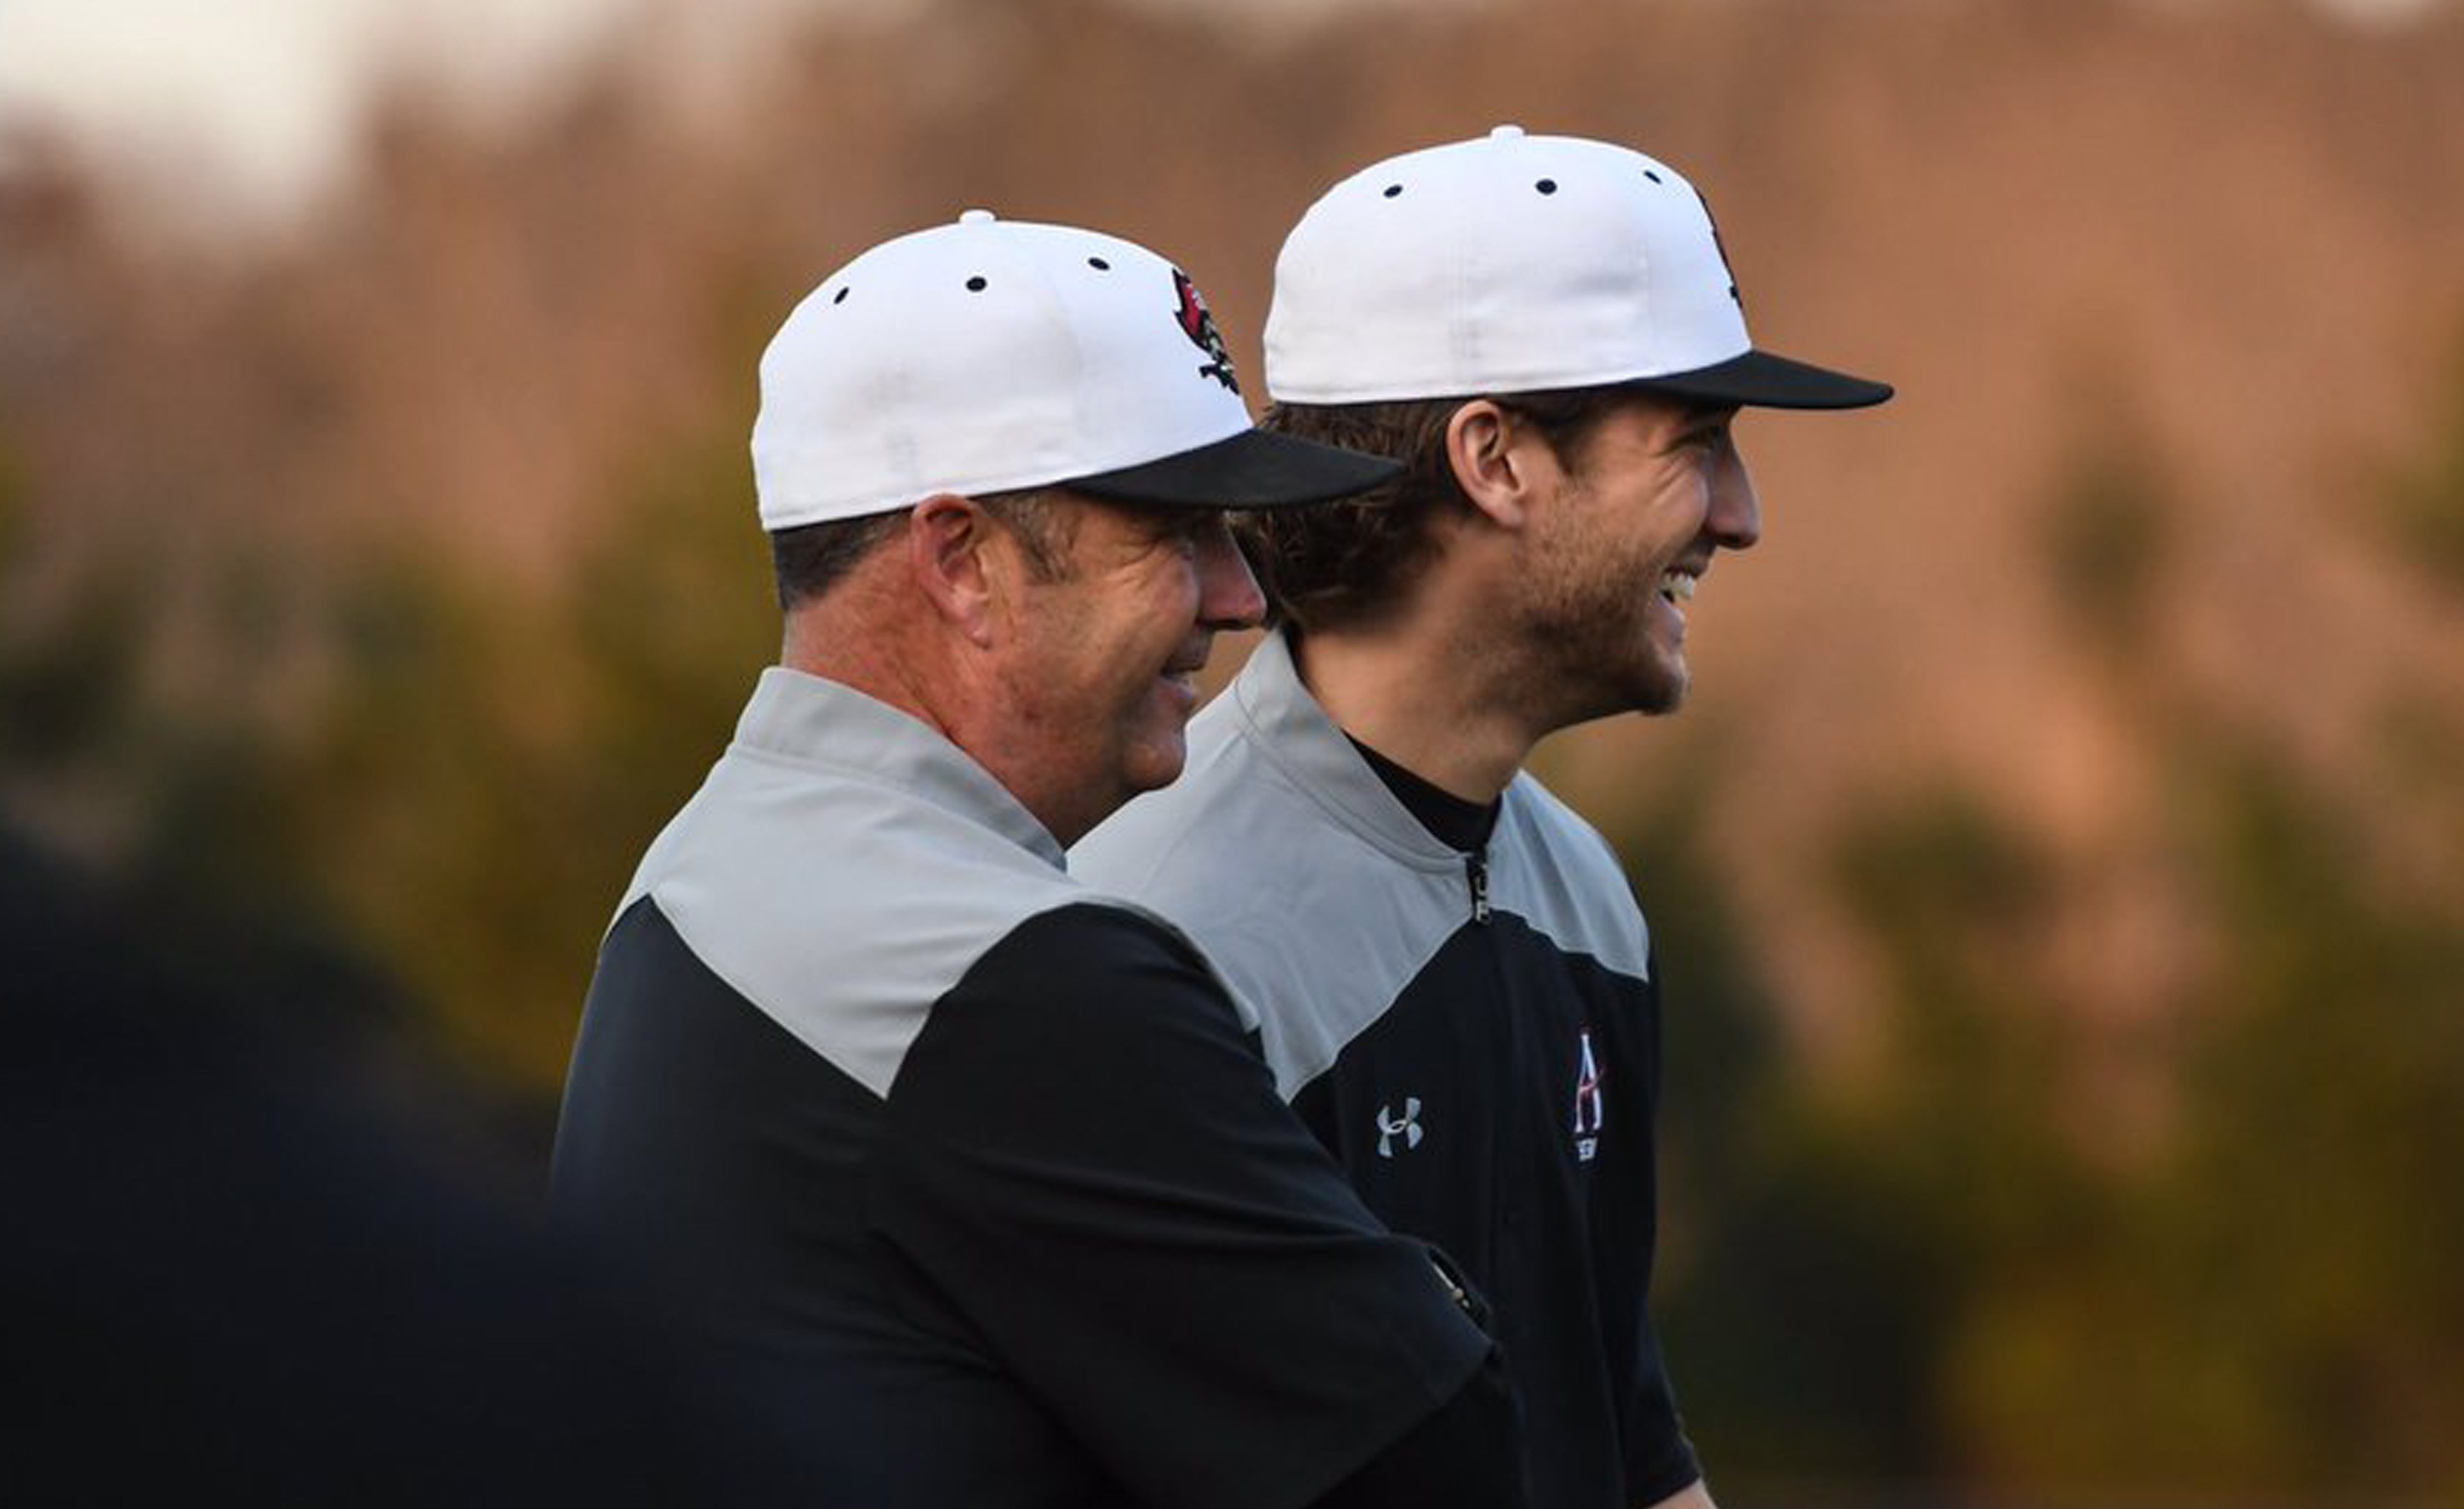 Mike Linch smiling while coaching player at Allatoona High